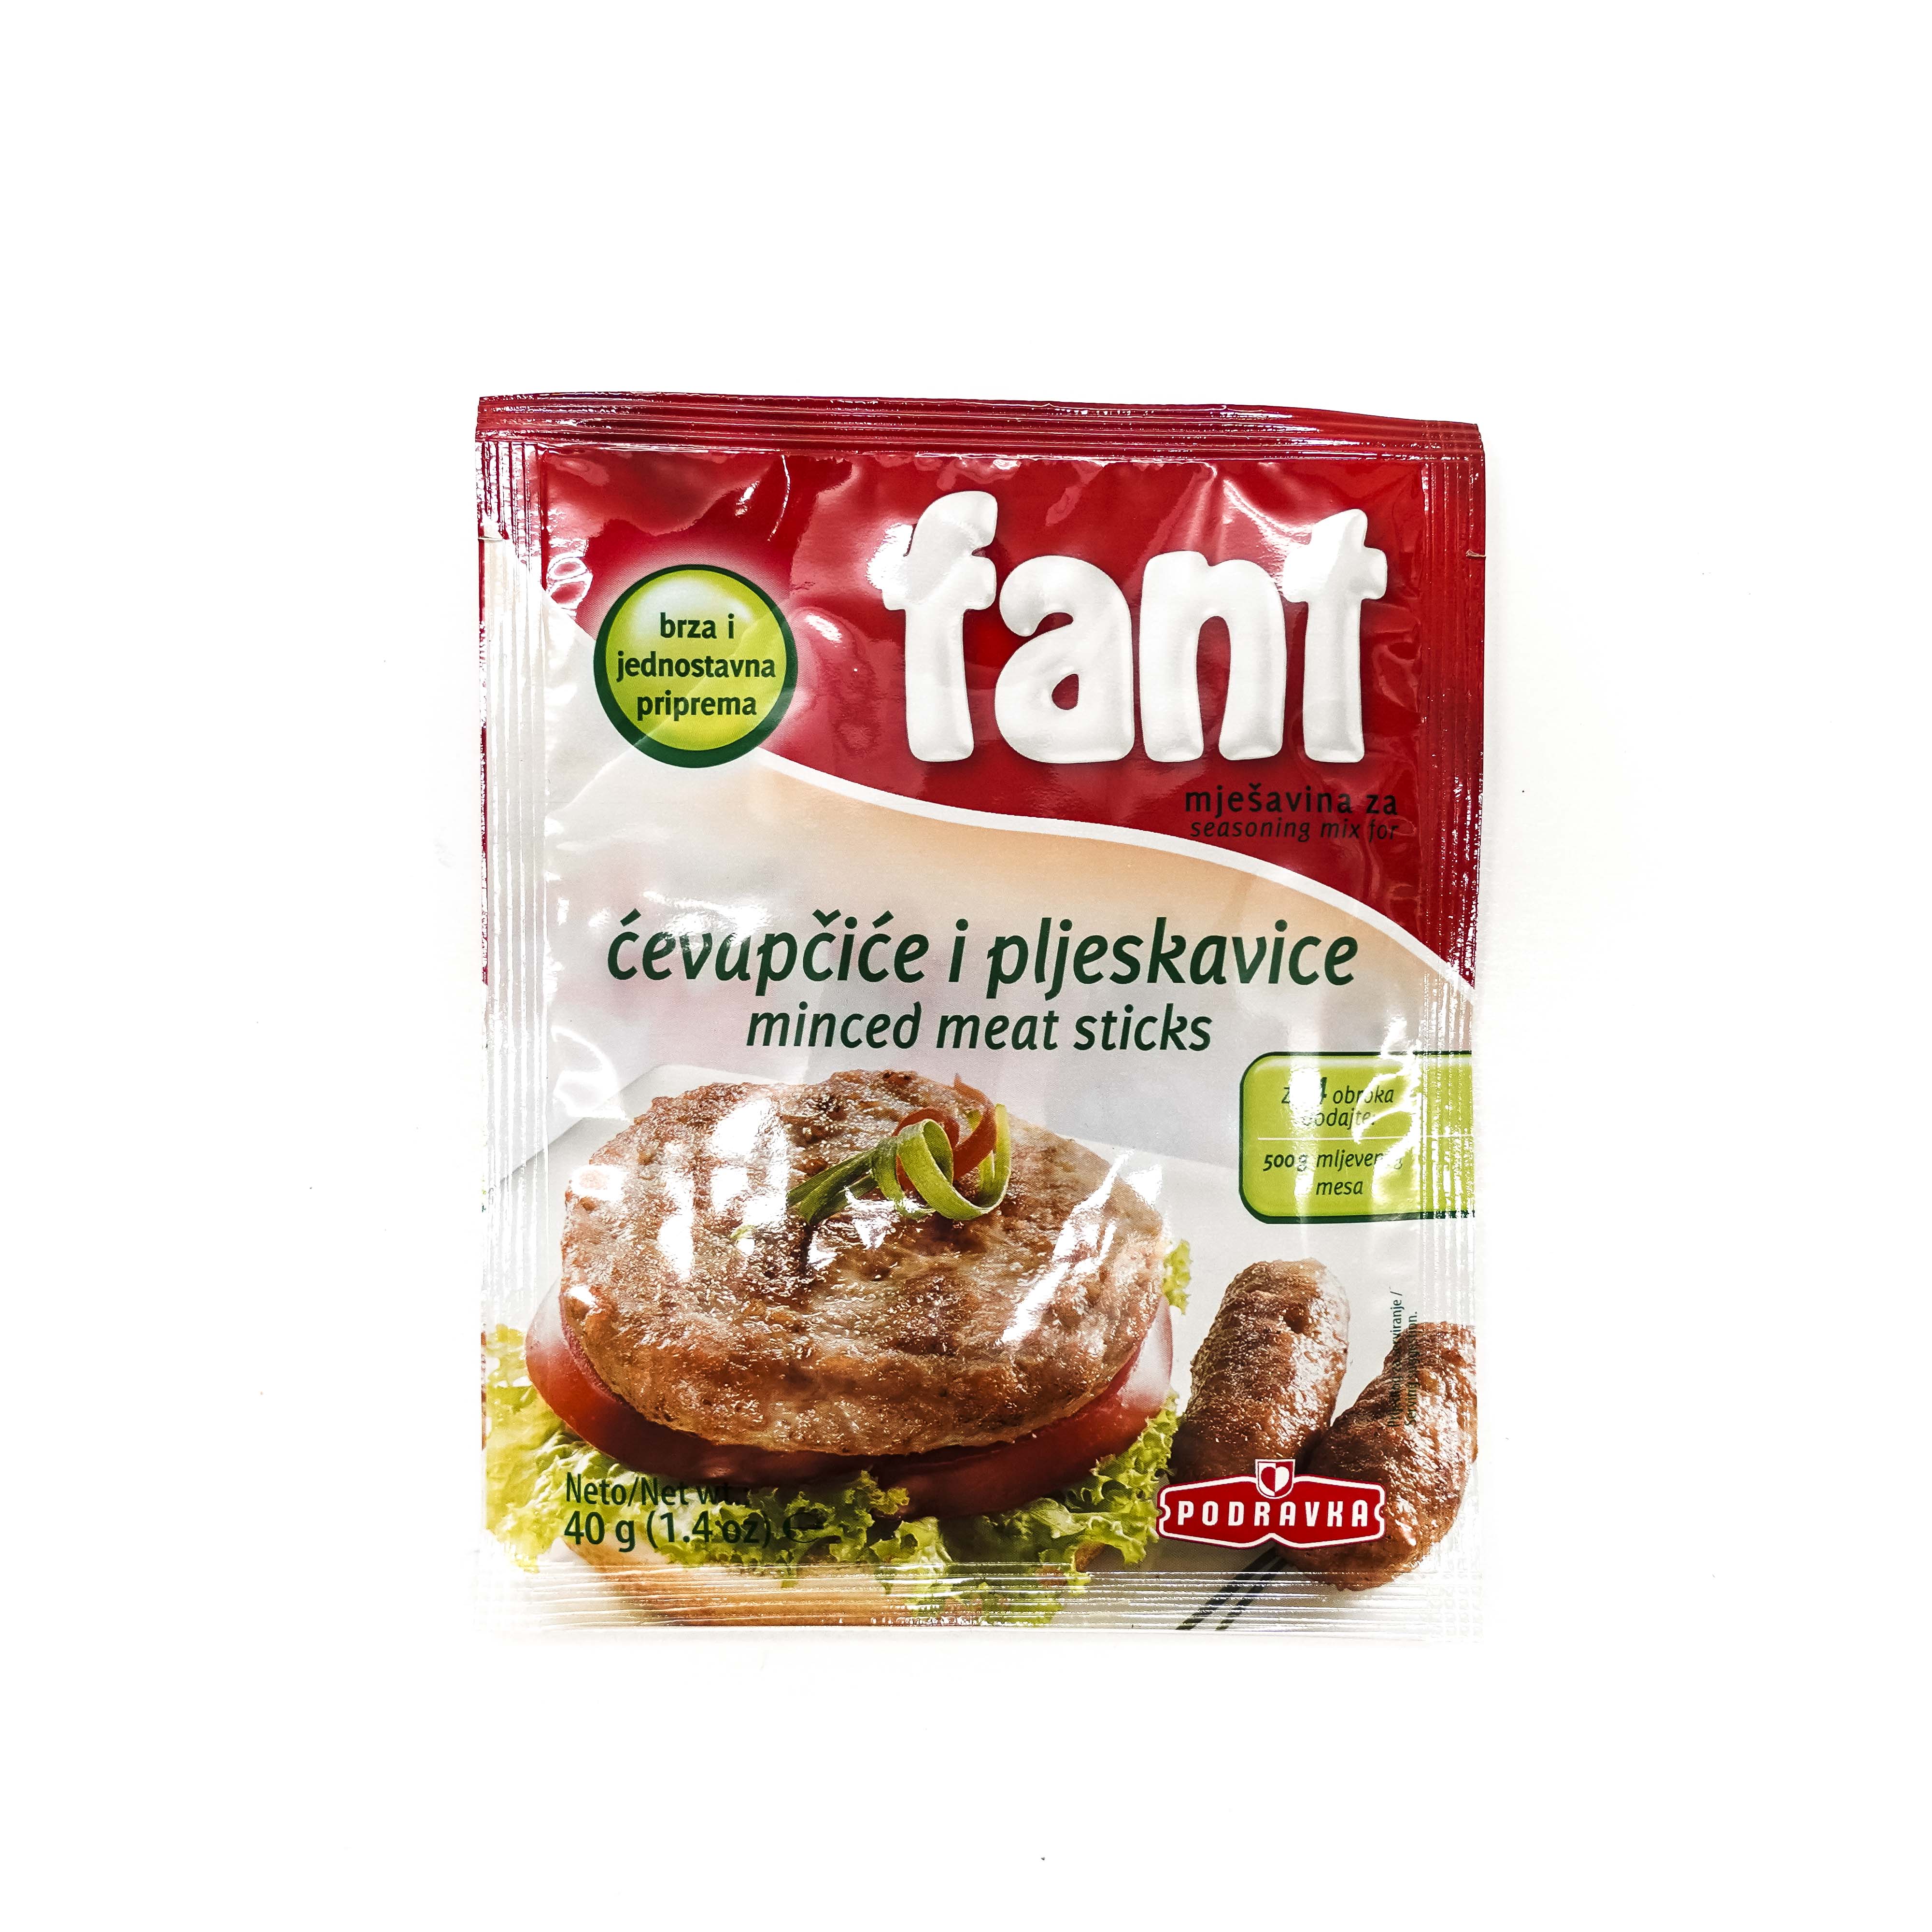 Fant Seasoning Mix for Minced Meat Sticks